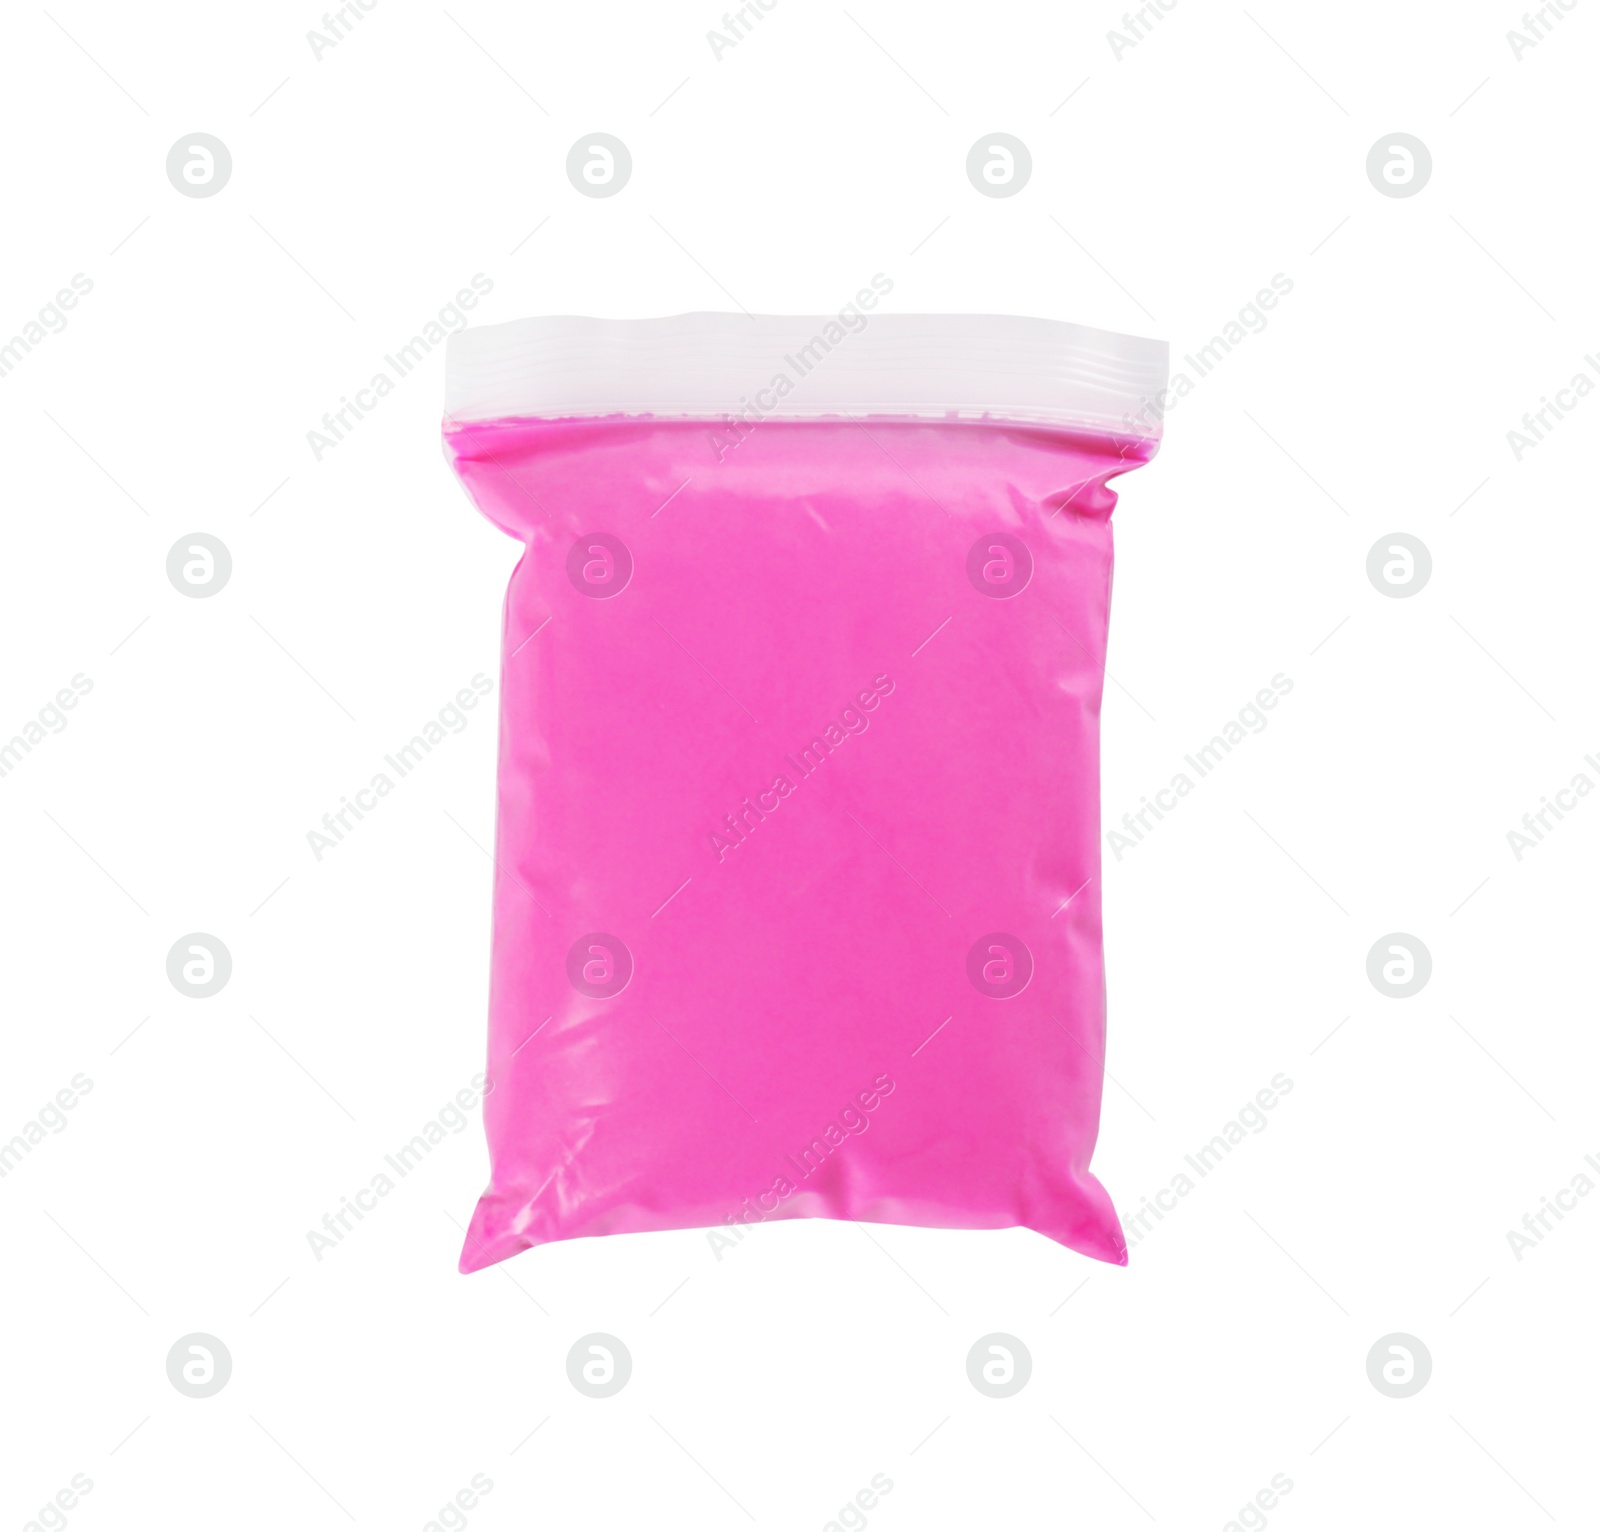 Photo of Package of pink play dough on white background, top view